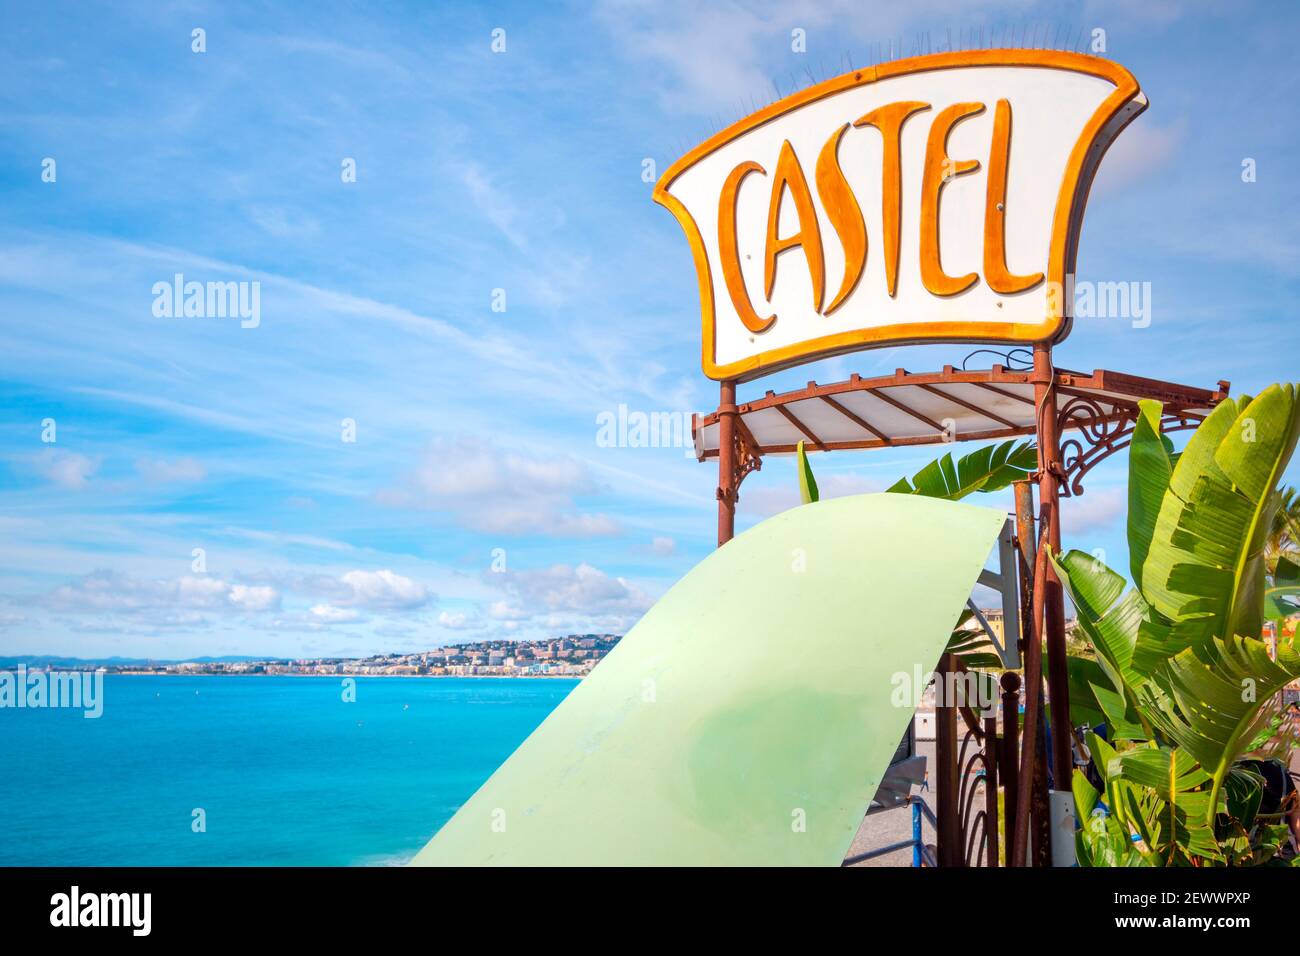 Promenade view of the Castel Plage sign and entrance along the French Riviera in the city of Nice, France. Stock Photo